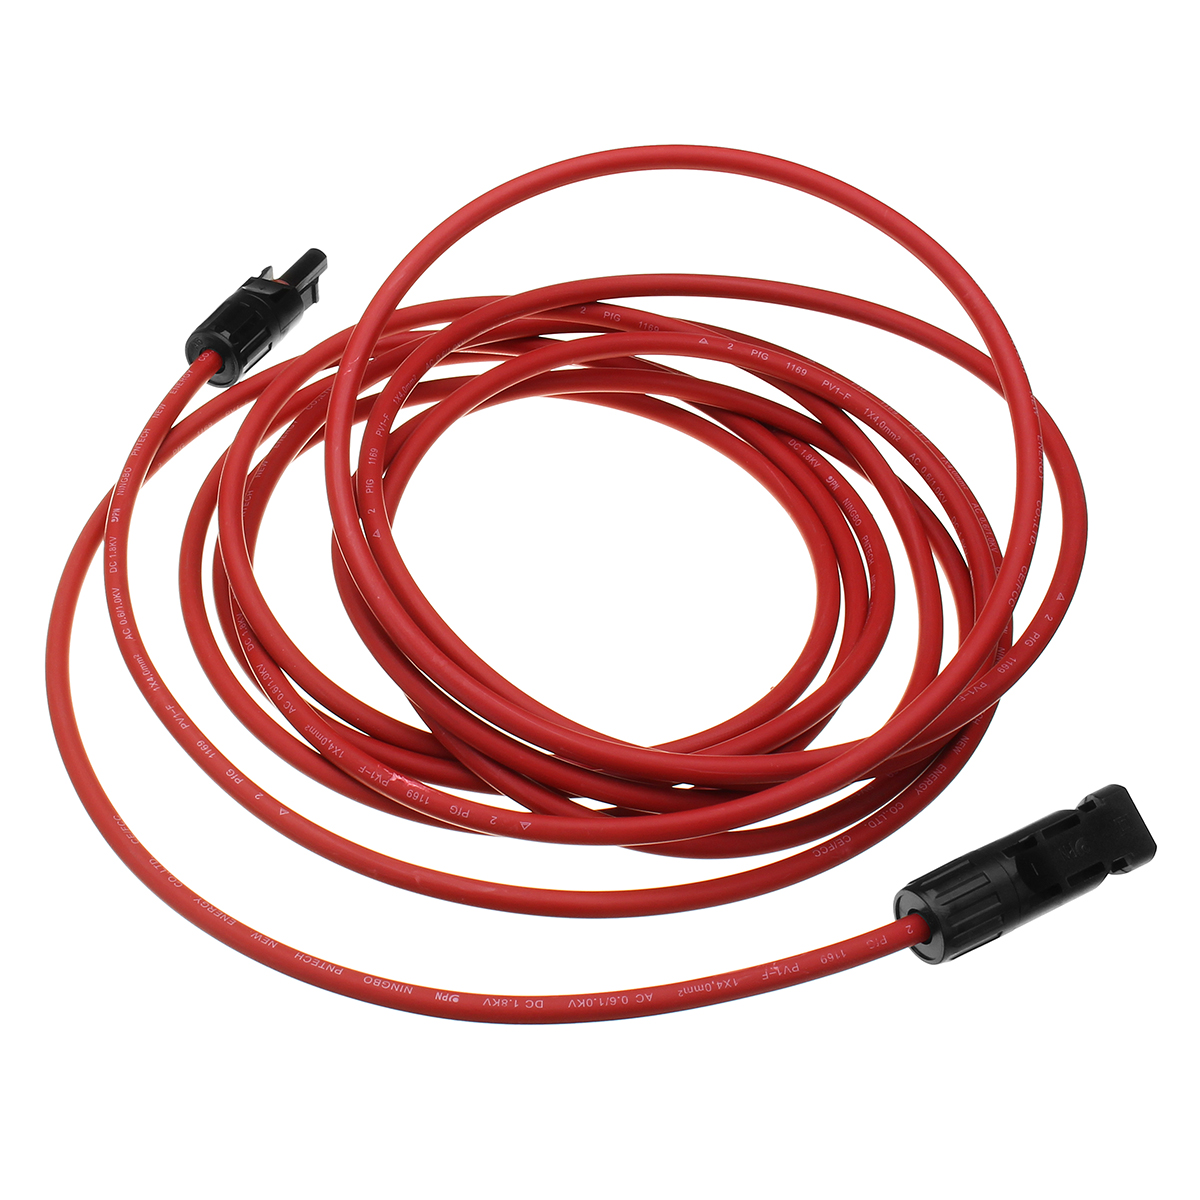 1-Pair-of-Black--Red-5M-AWG12-MC4-Connector-Extension-Cable-Wire-for-Solar-Panel-1315162